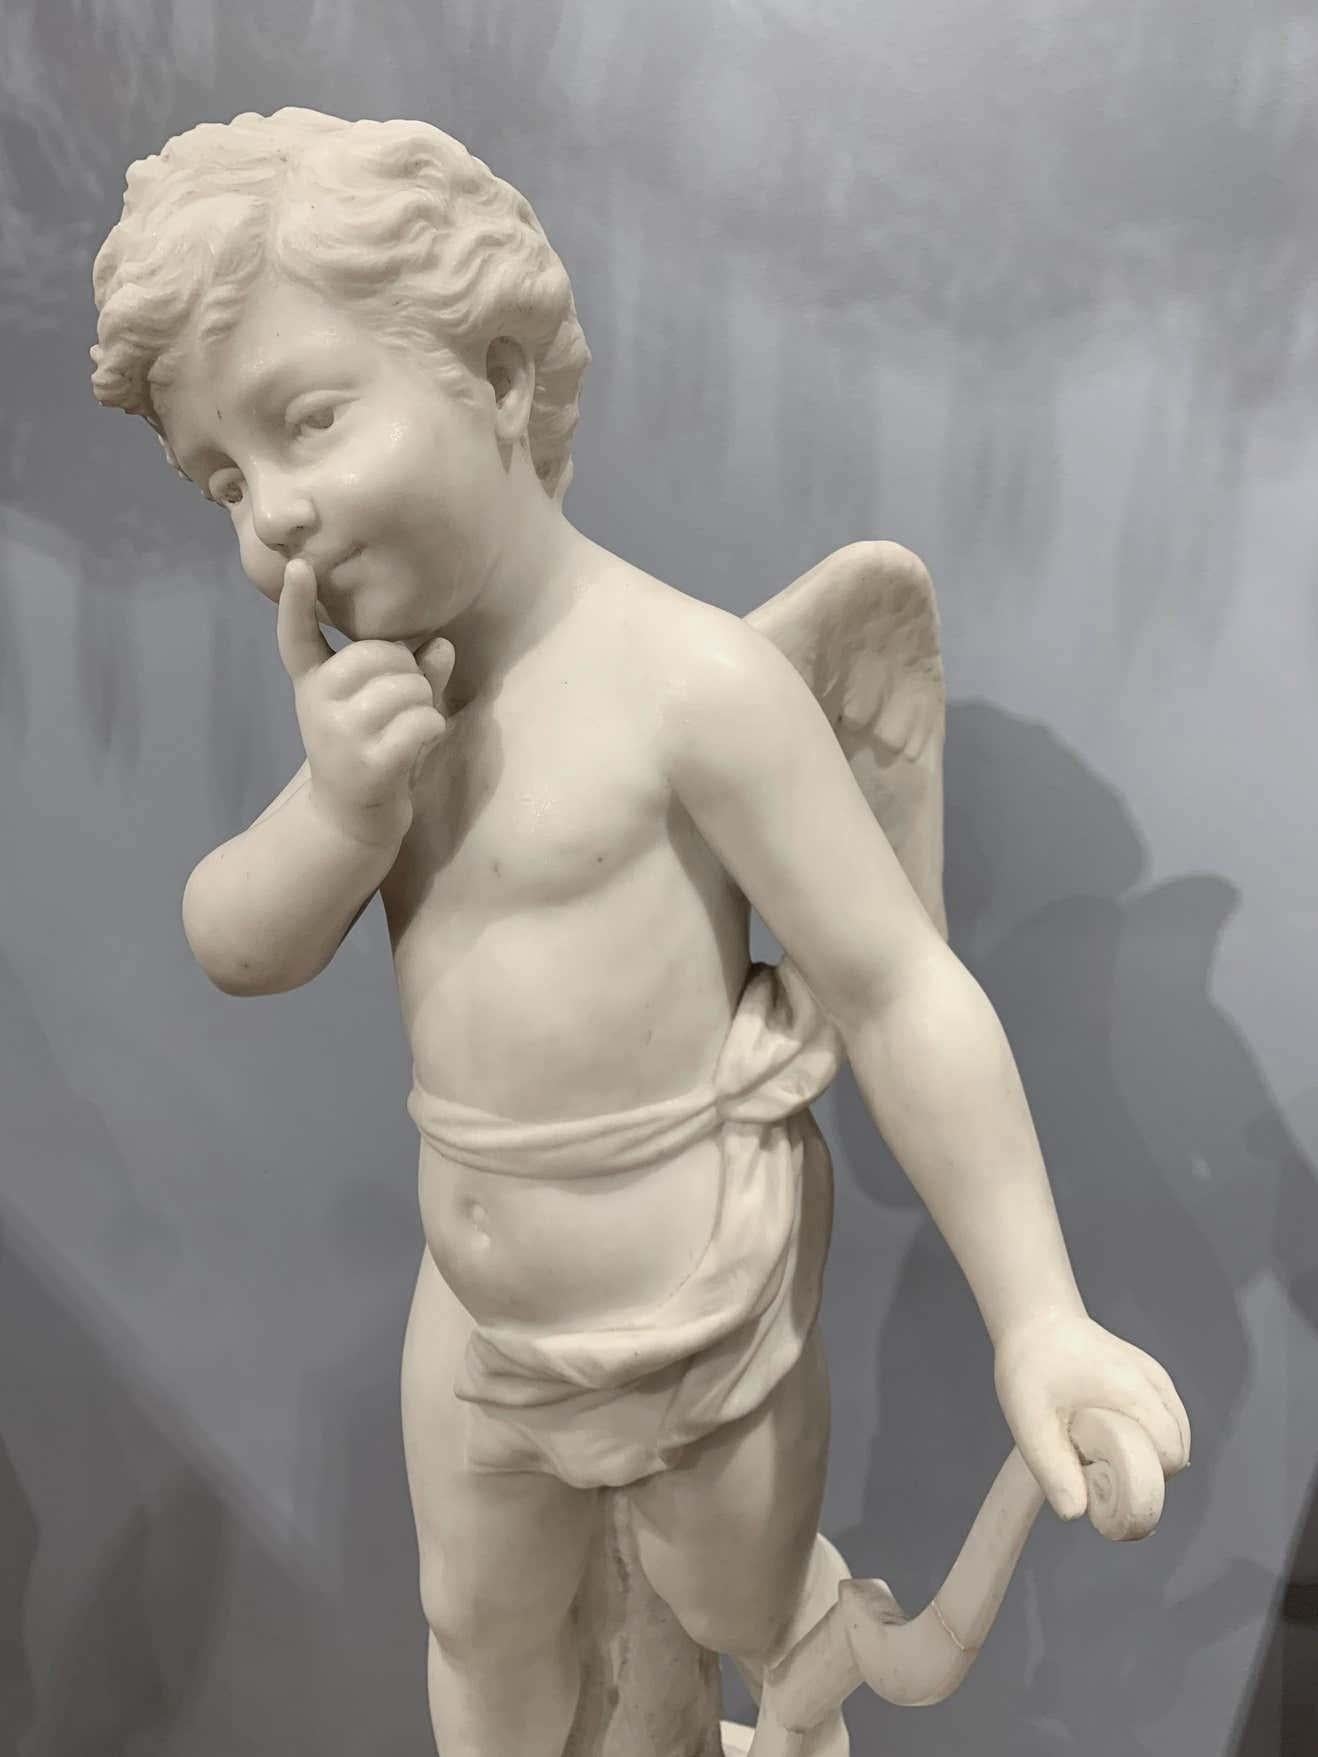 Cupid Holding a Bow
by French Sculptor Joseph-Charles Marin (1759-1834)
White Marble, signed and dated 1784 

Provenance: Carl Singer, from the Estate of Charles Hitchcock Tyler, Beverly MA, deceased ca. 1932

NMA Inv. 5907